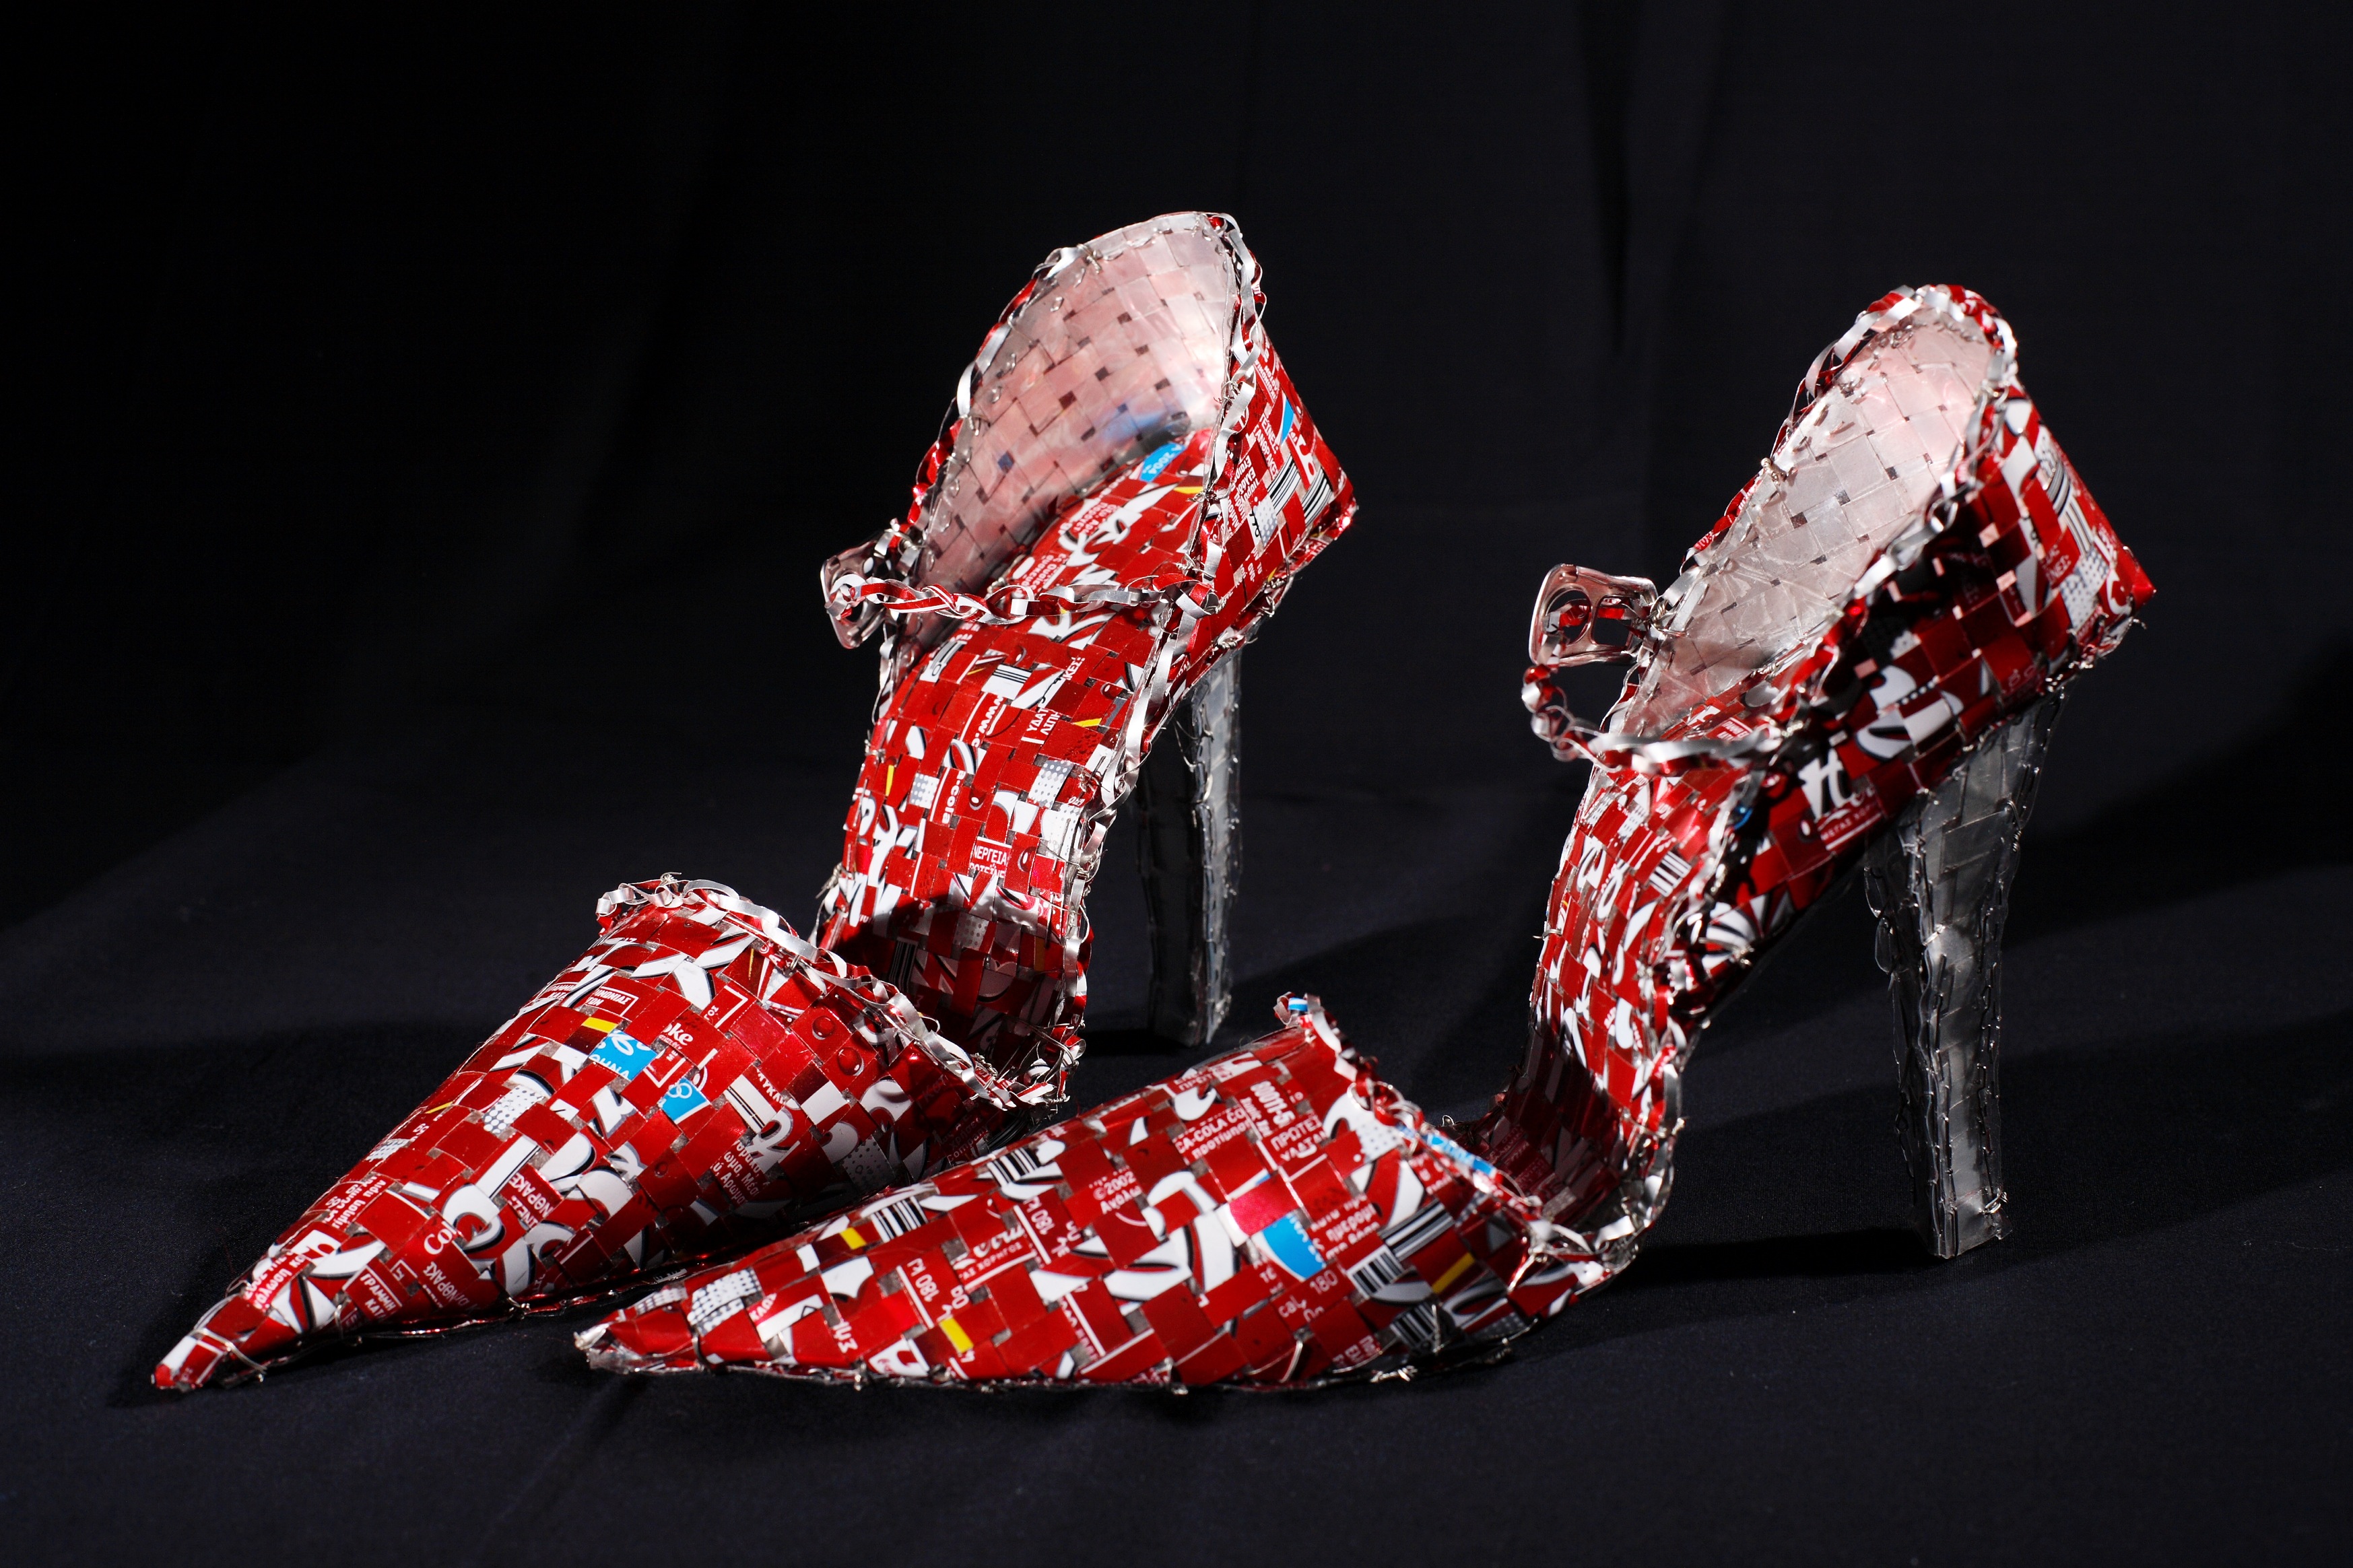 Pumps inspired by Maria Callas made of aluminum